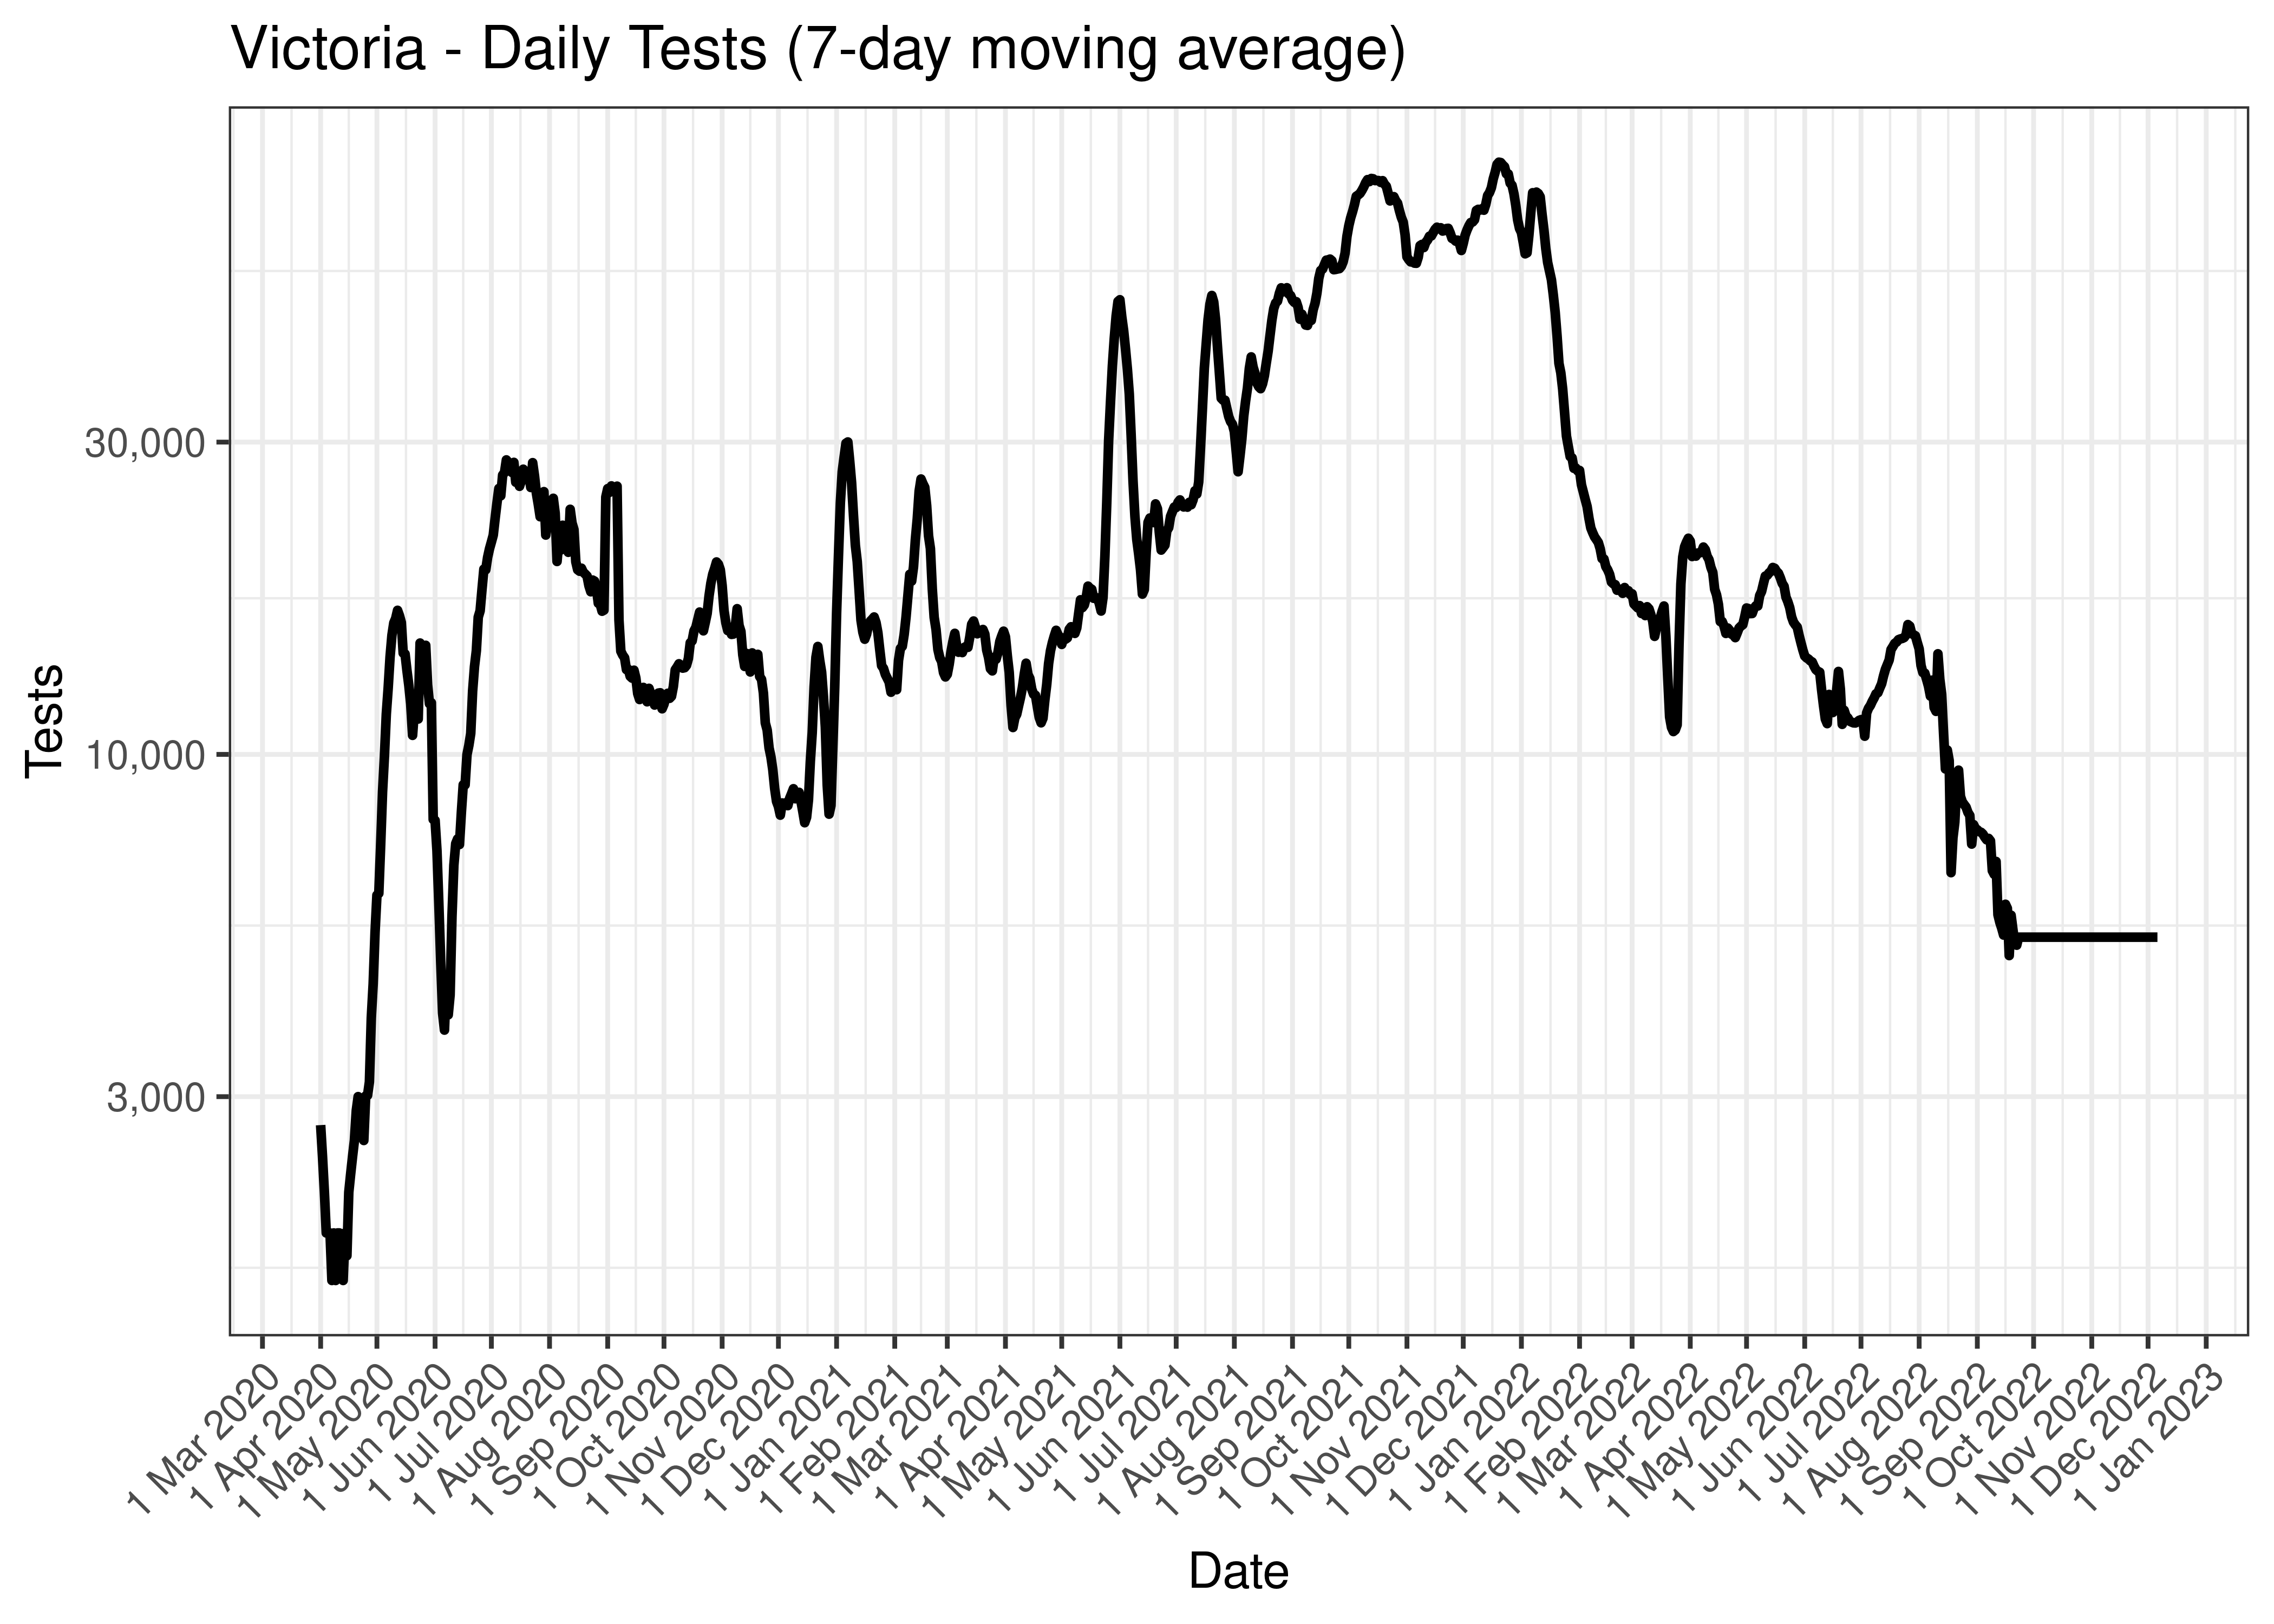 Victoria - Daily Tests (7-day moving average)